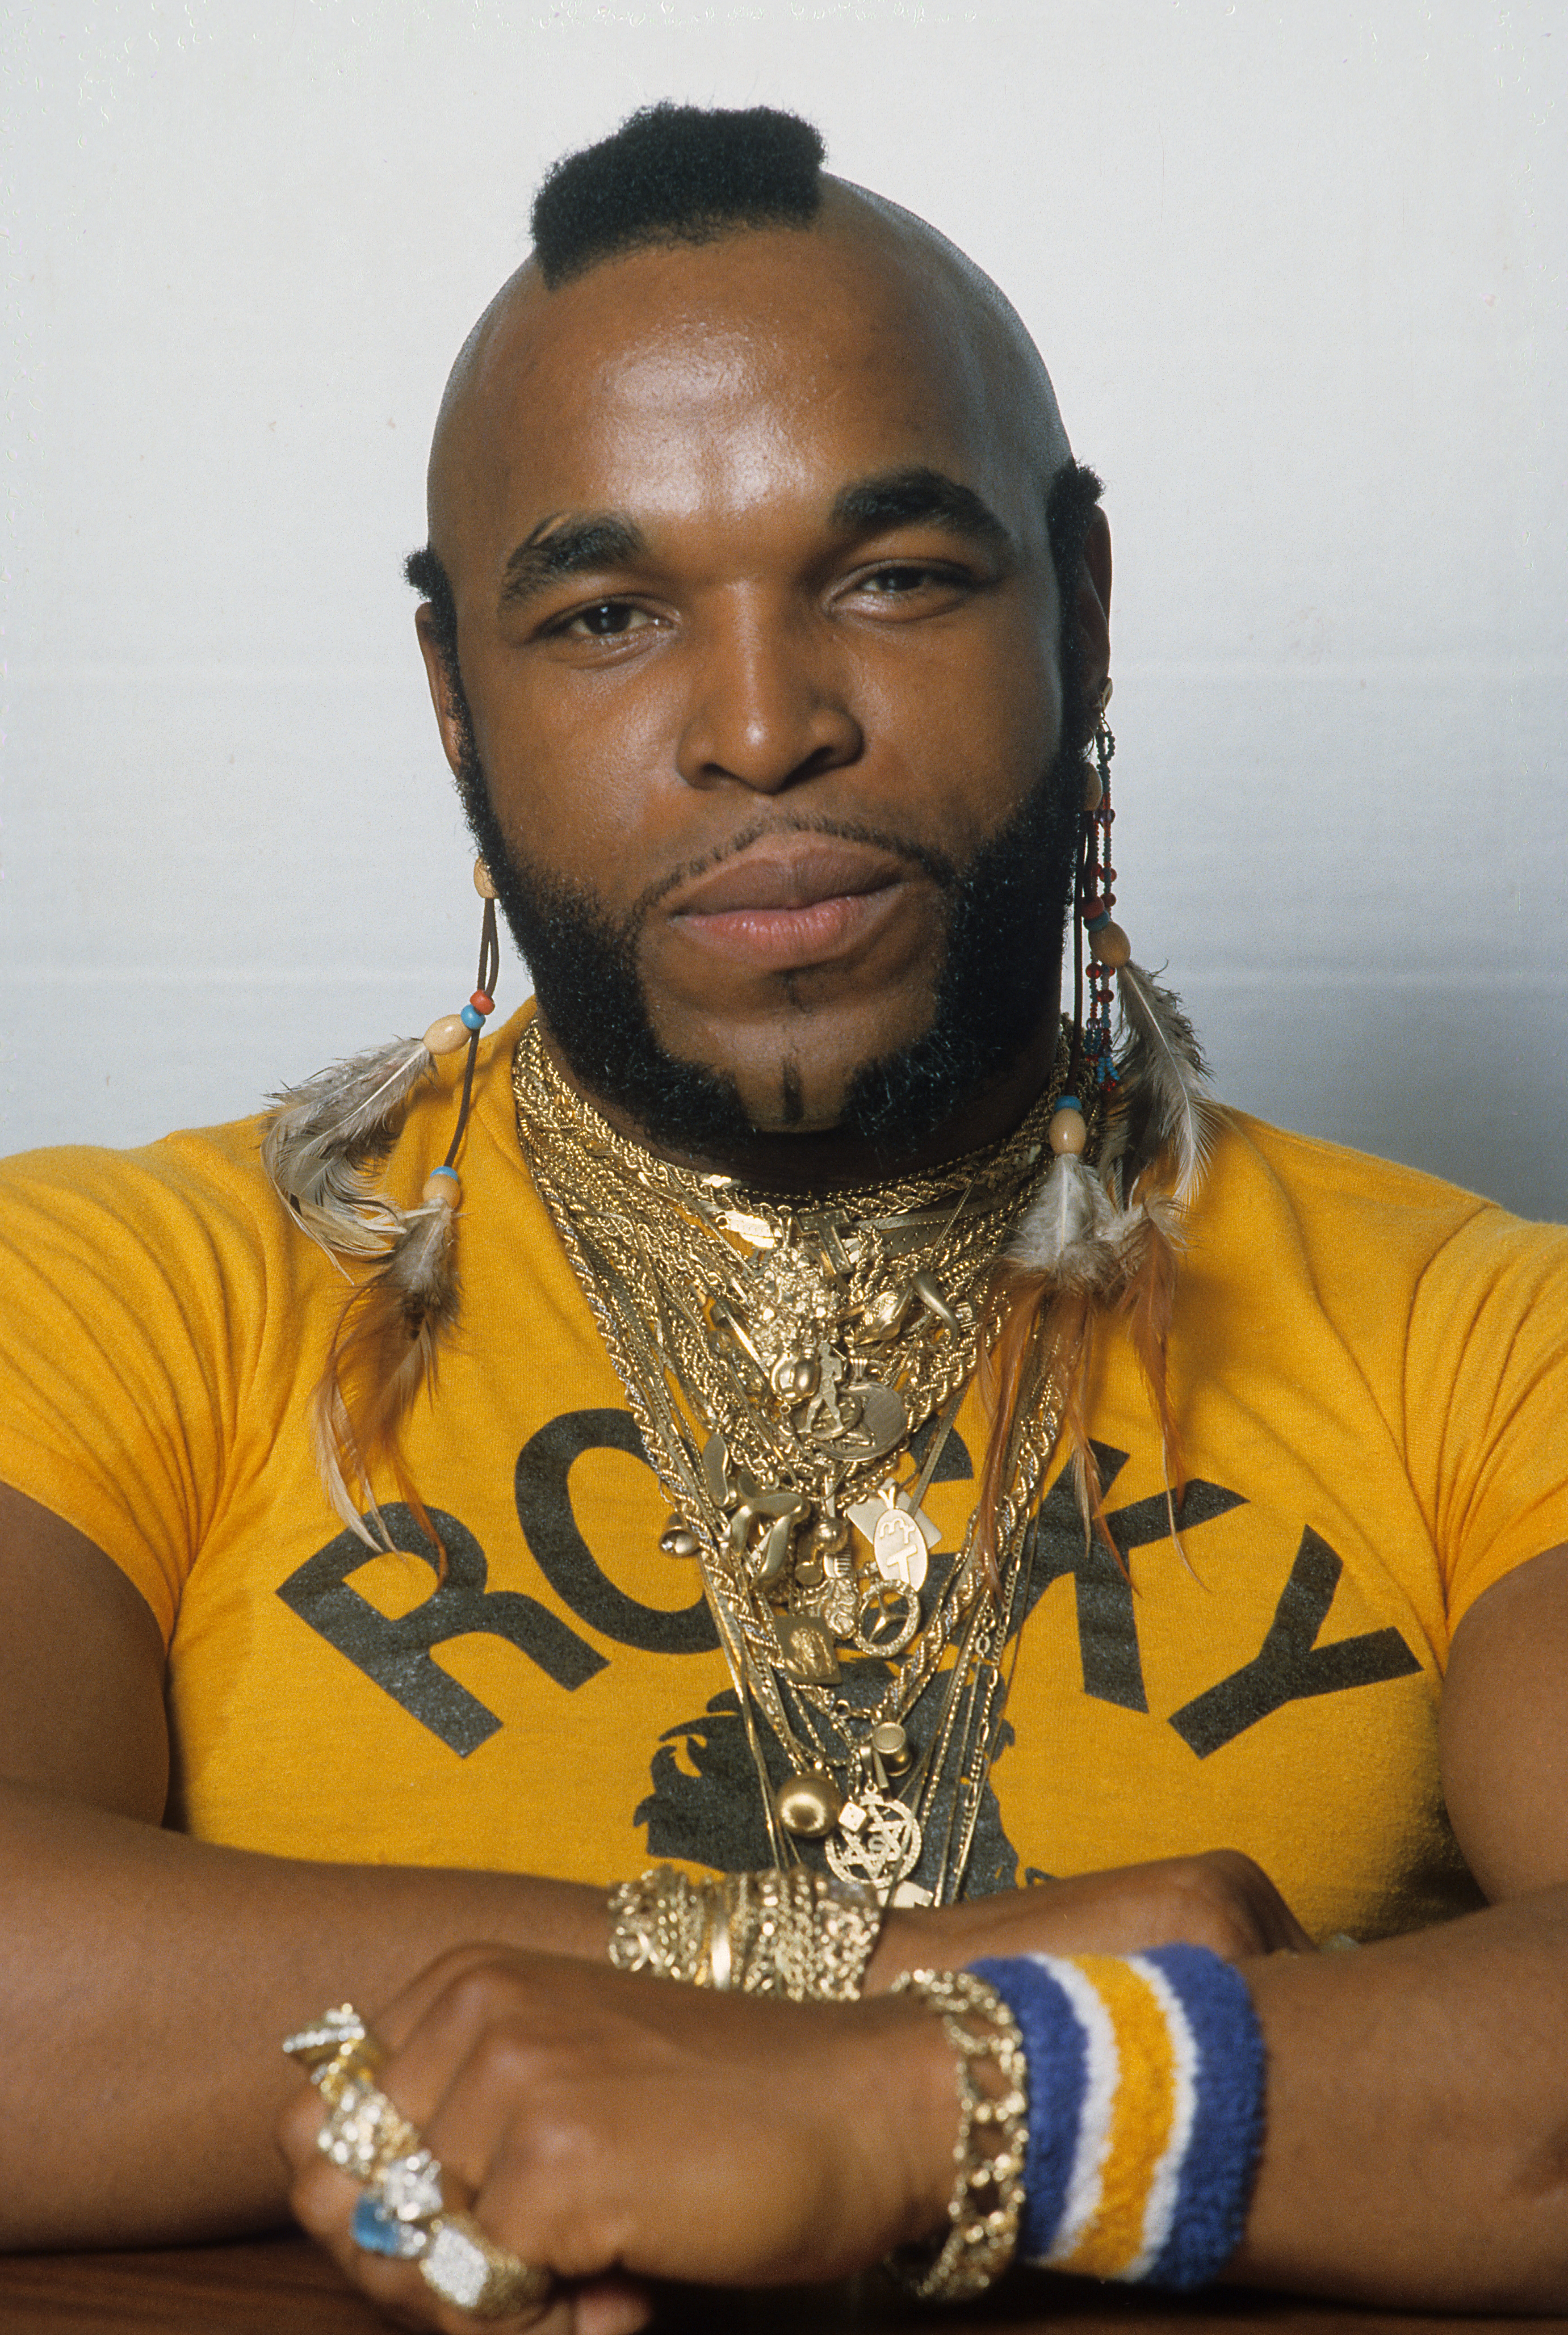 Mr. T. circa 1985 | Source: Getty Images